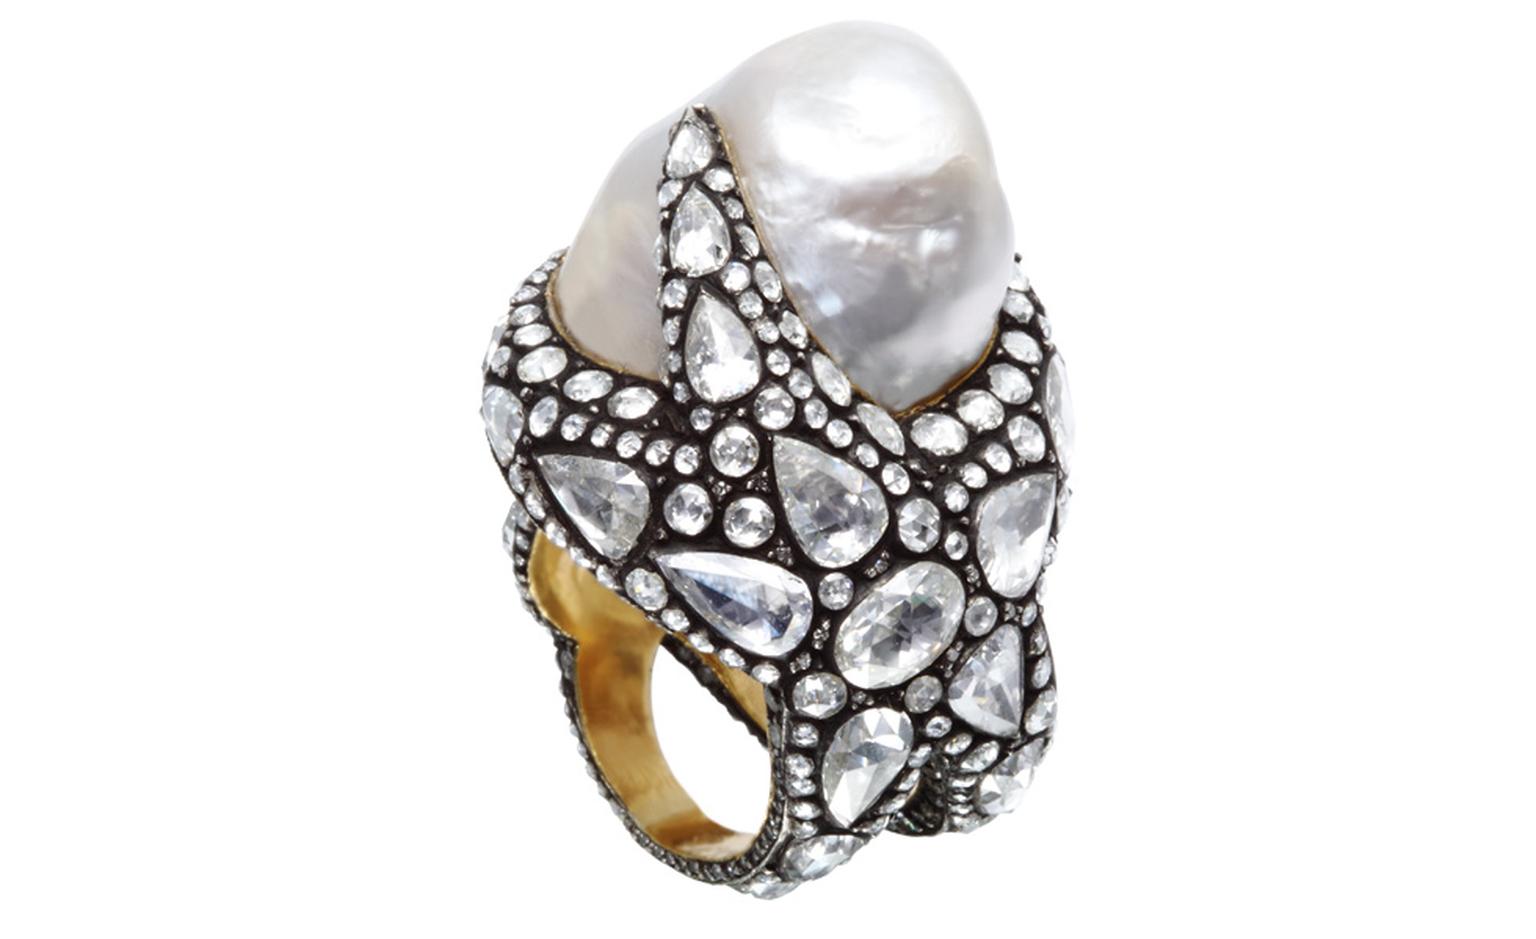 More marine inspiration in this Sevan Biçakçi ring that wraps a starfish around the finger topped by a gorgeous baroque pearl. Rose-cut diamonds stand out against the oxidised metal.